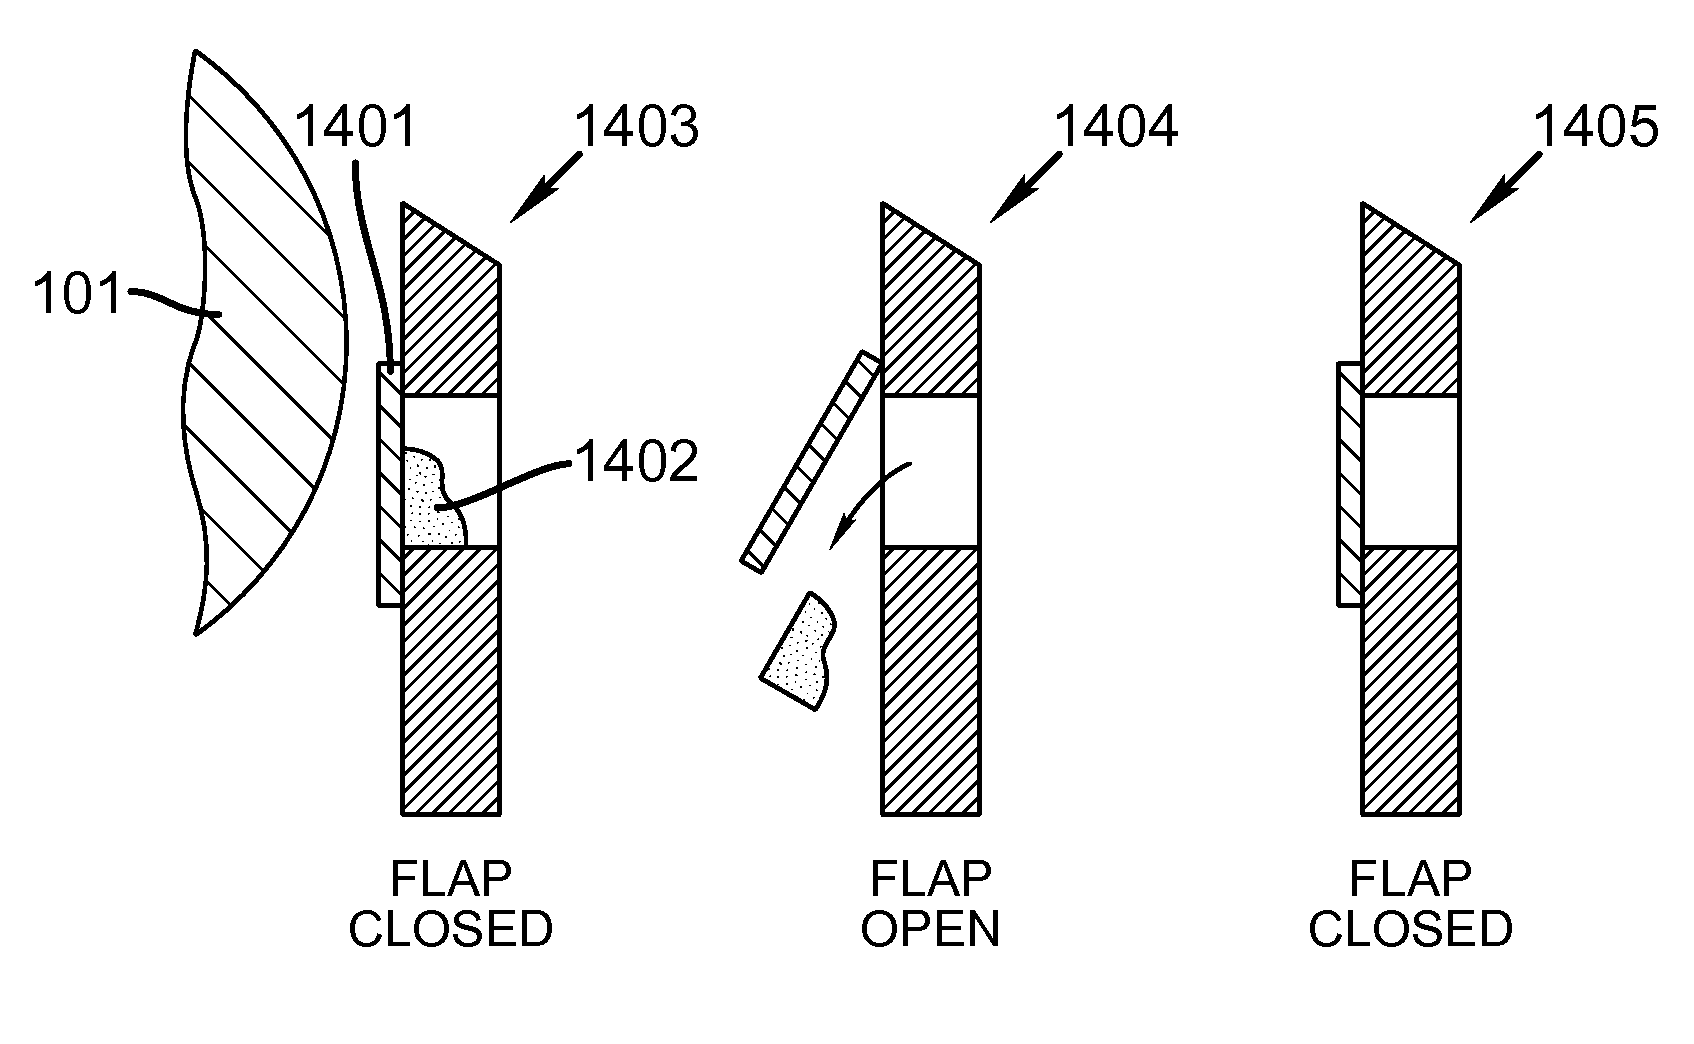 Method of implementing a magnetically actuated flap seal